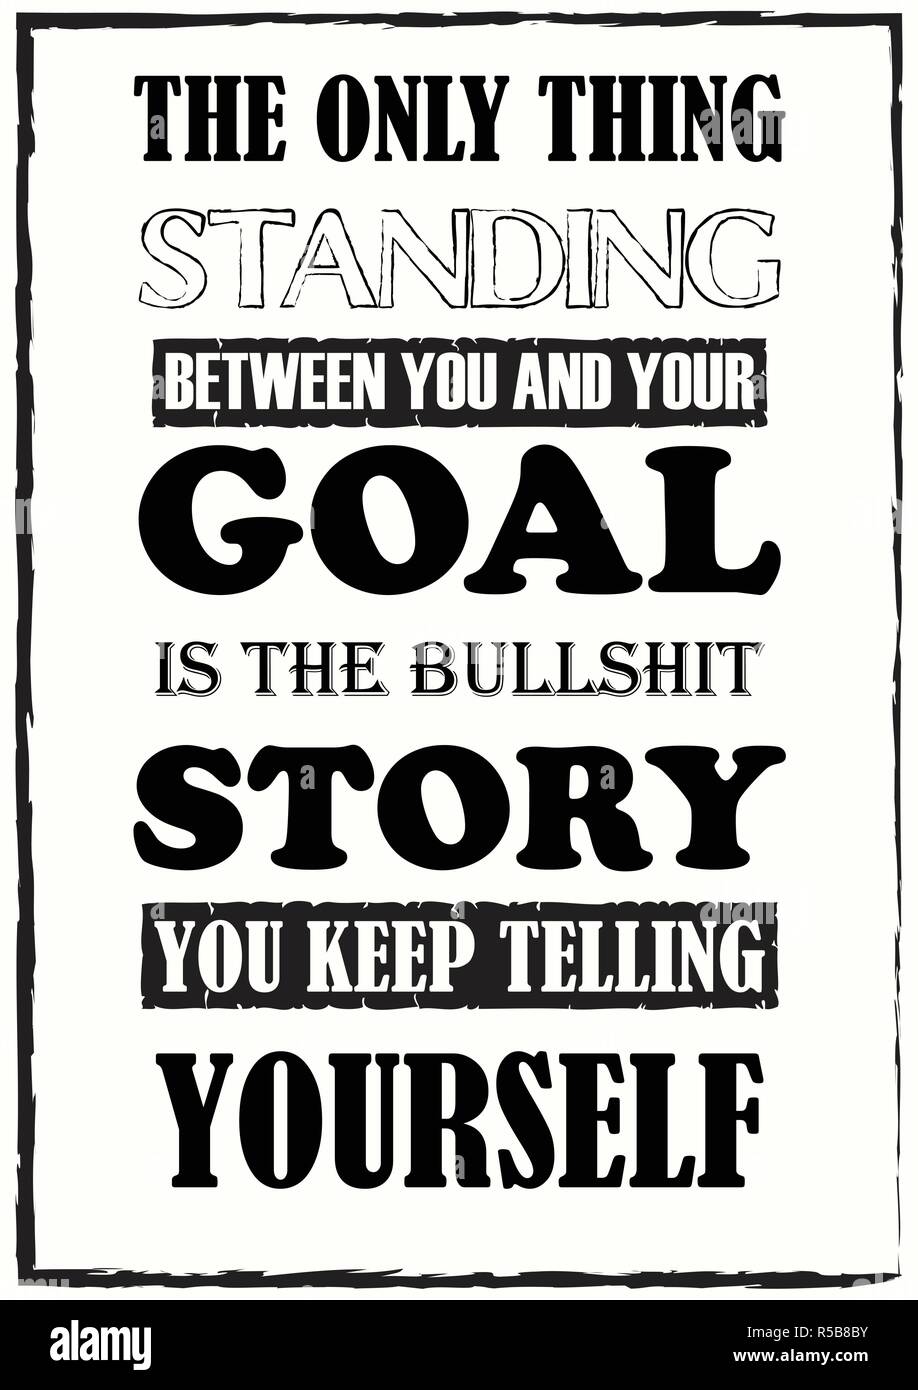 the only thing standing between you and your goal is the bullshit poster